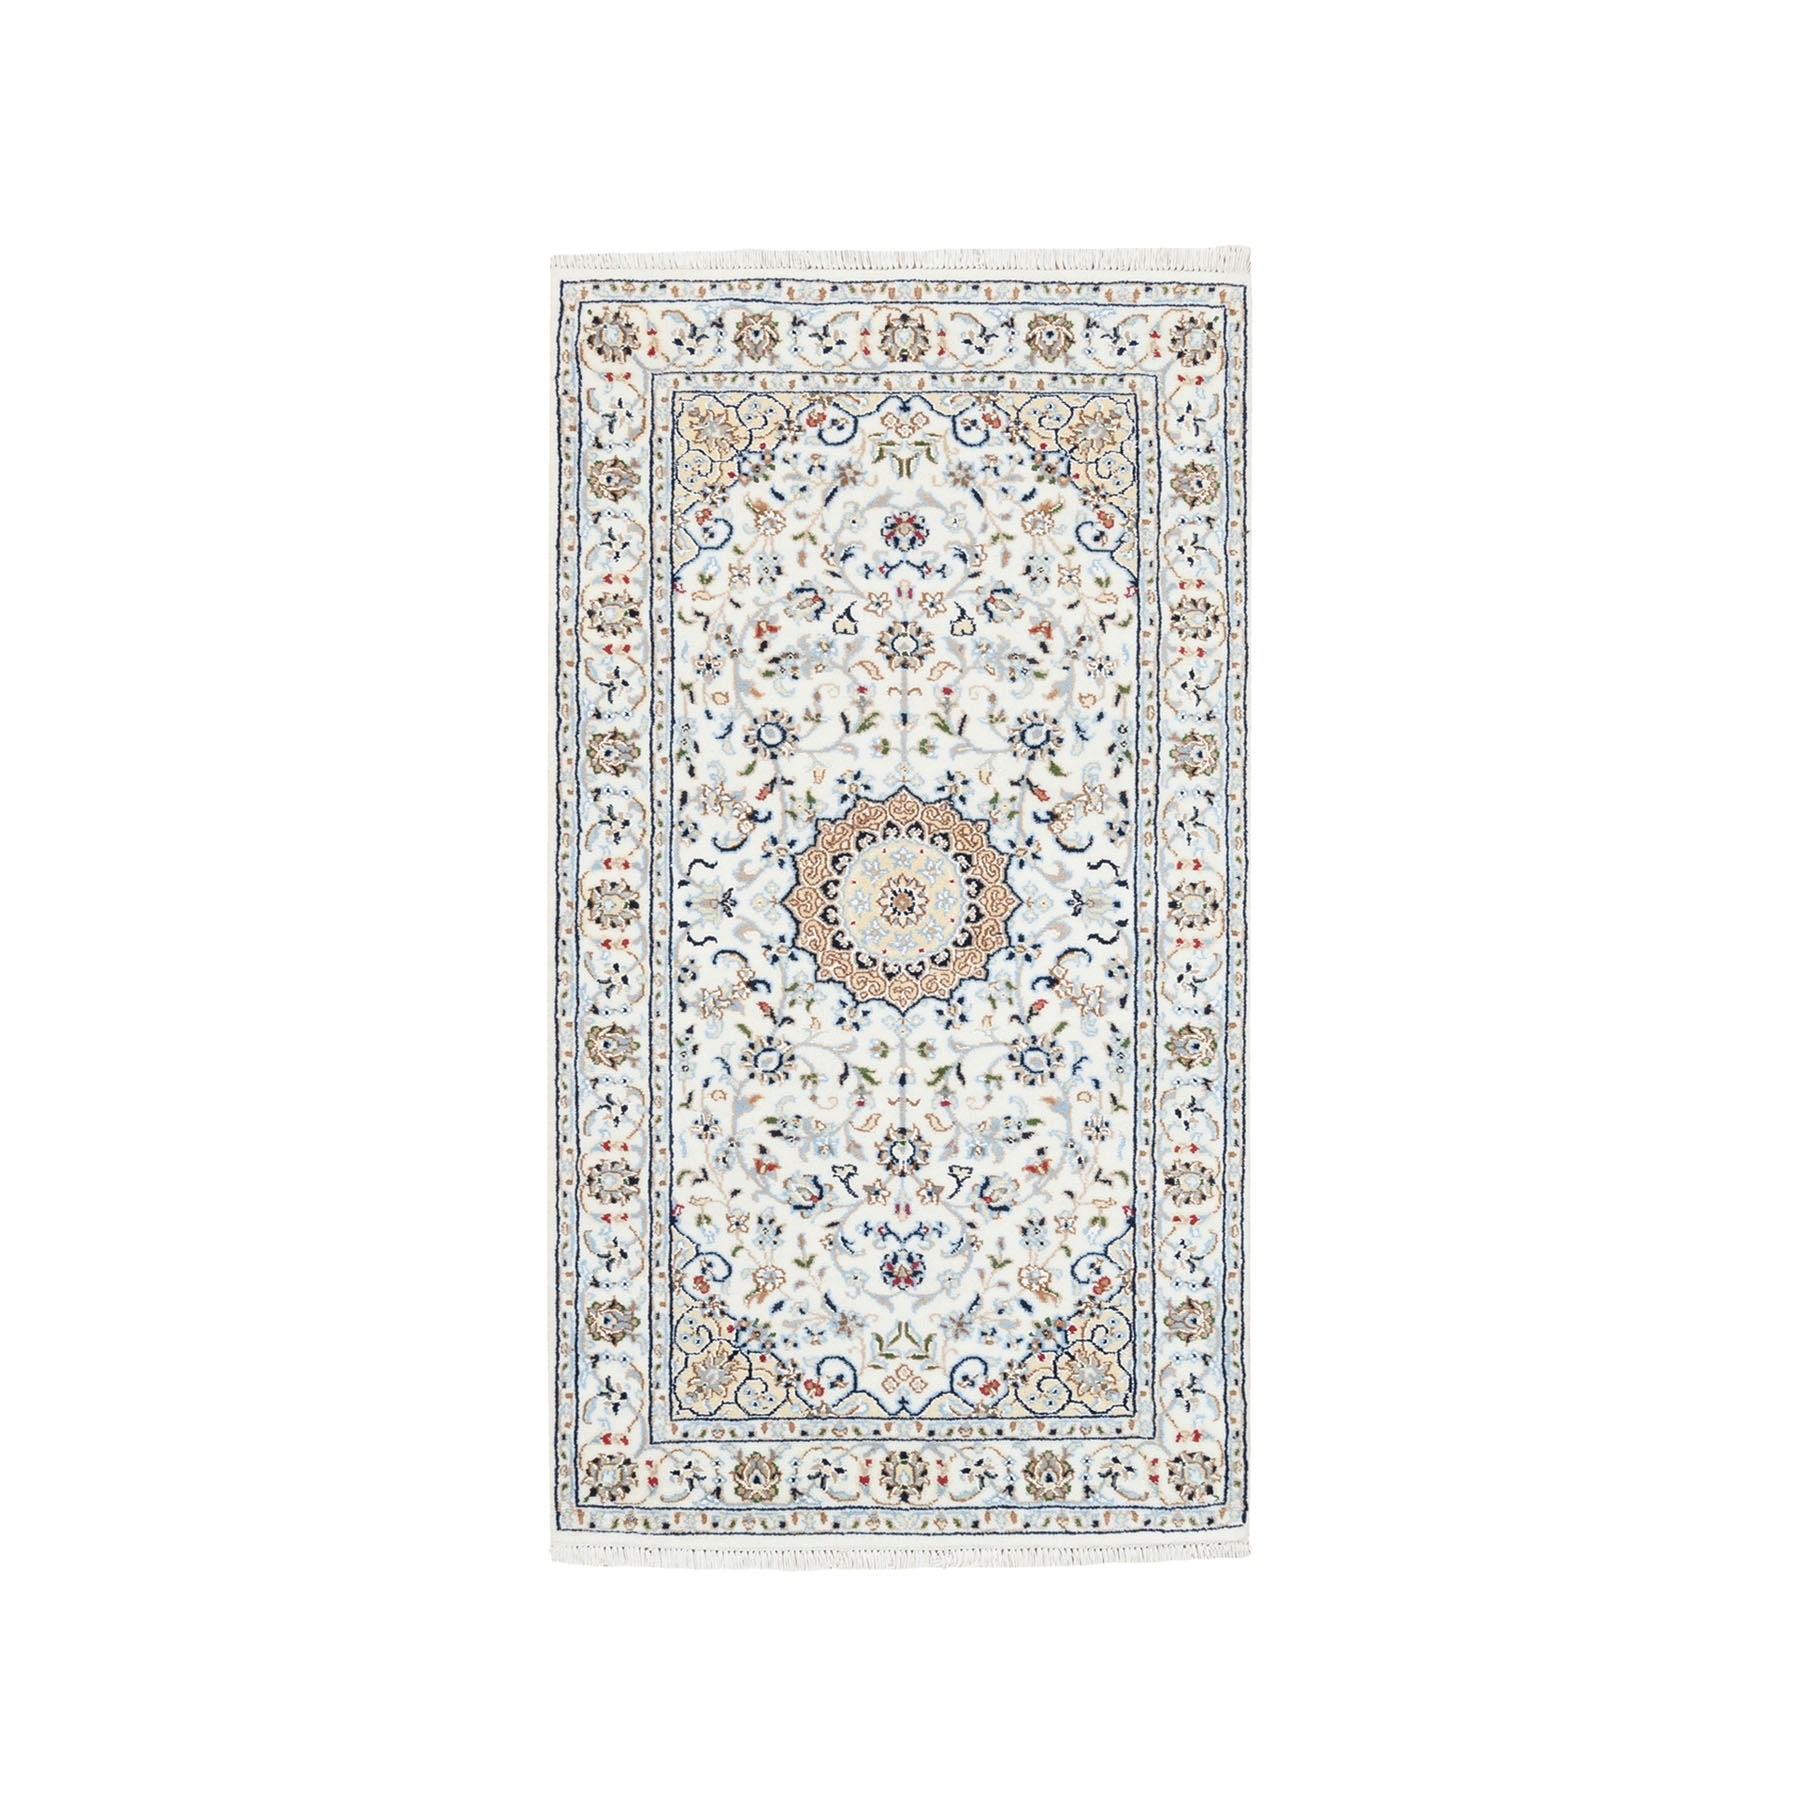 Pirniakan Collection Hand Knotted Ivory Rug No: 1125610